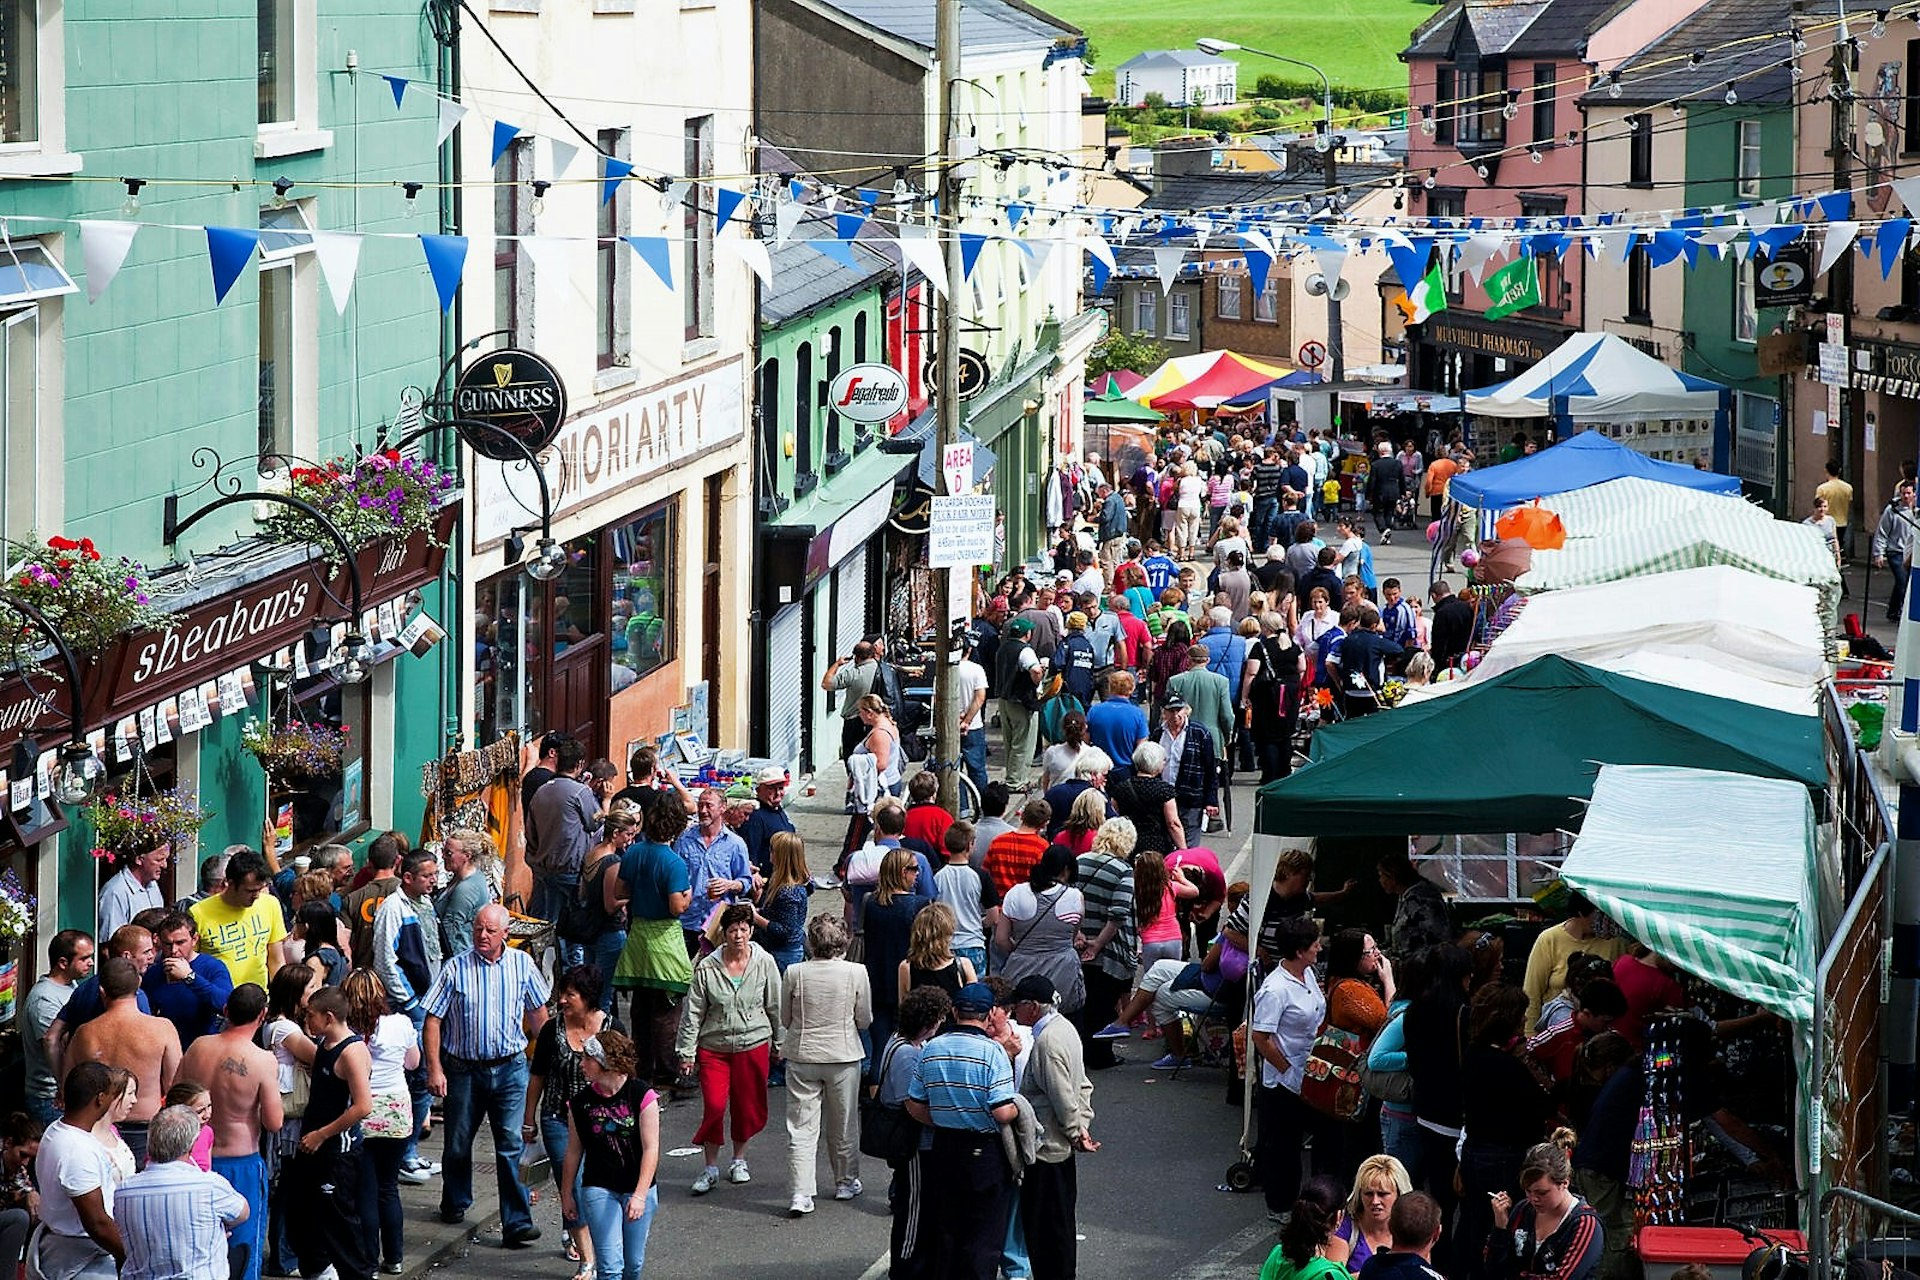 People stroll through the streets of Killorglin during the annual Puck Fair